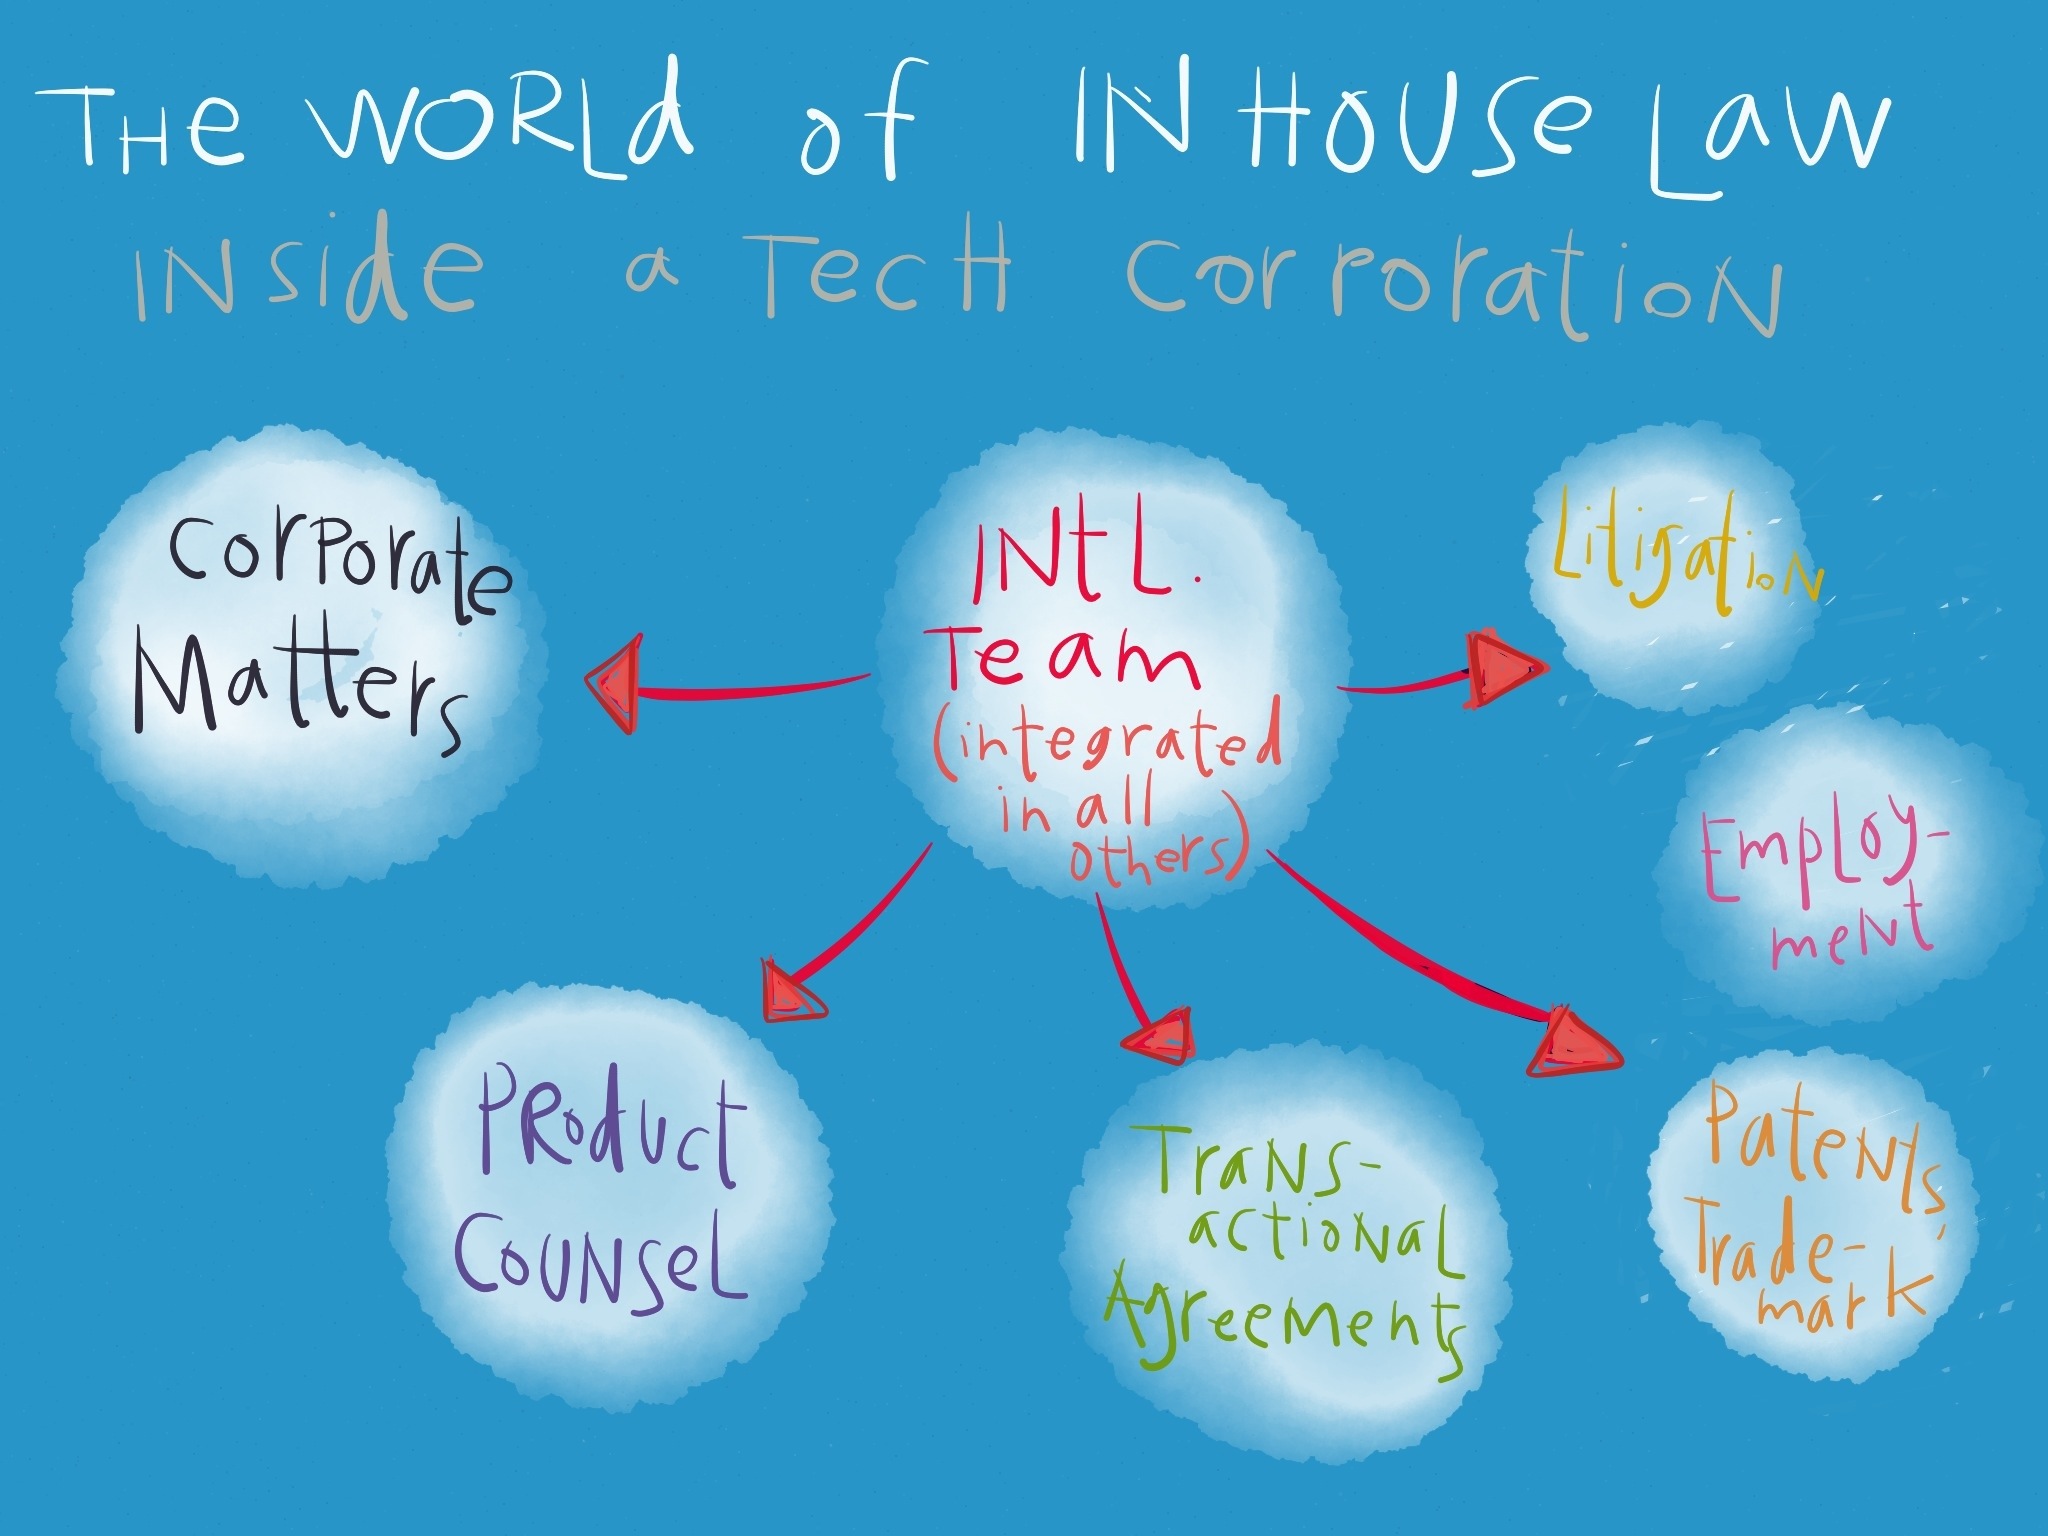 The world of IN House Counsel